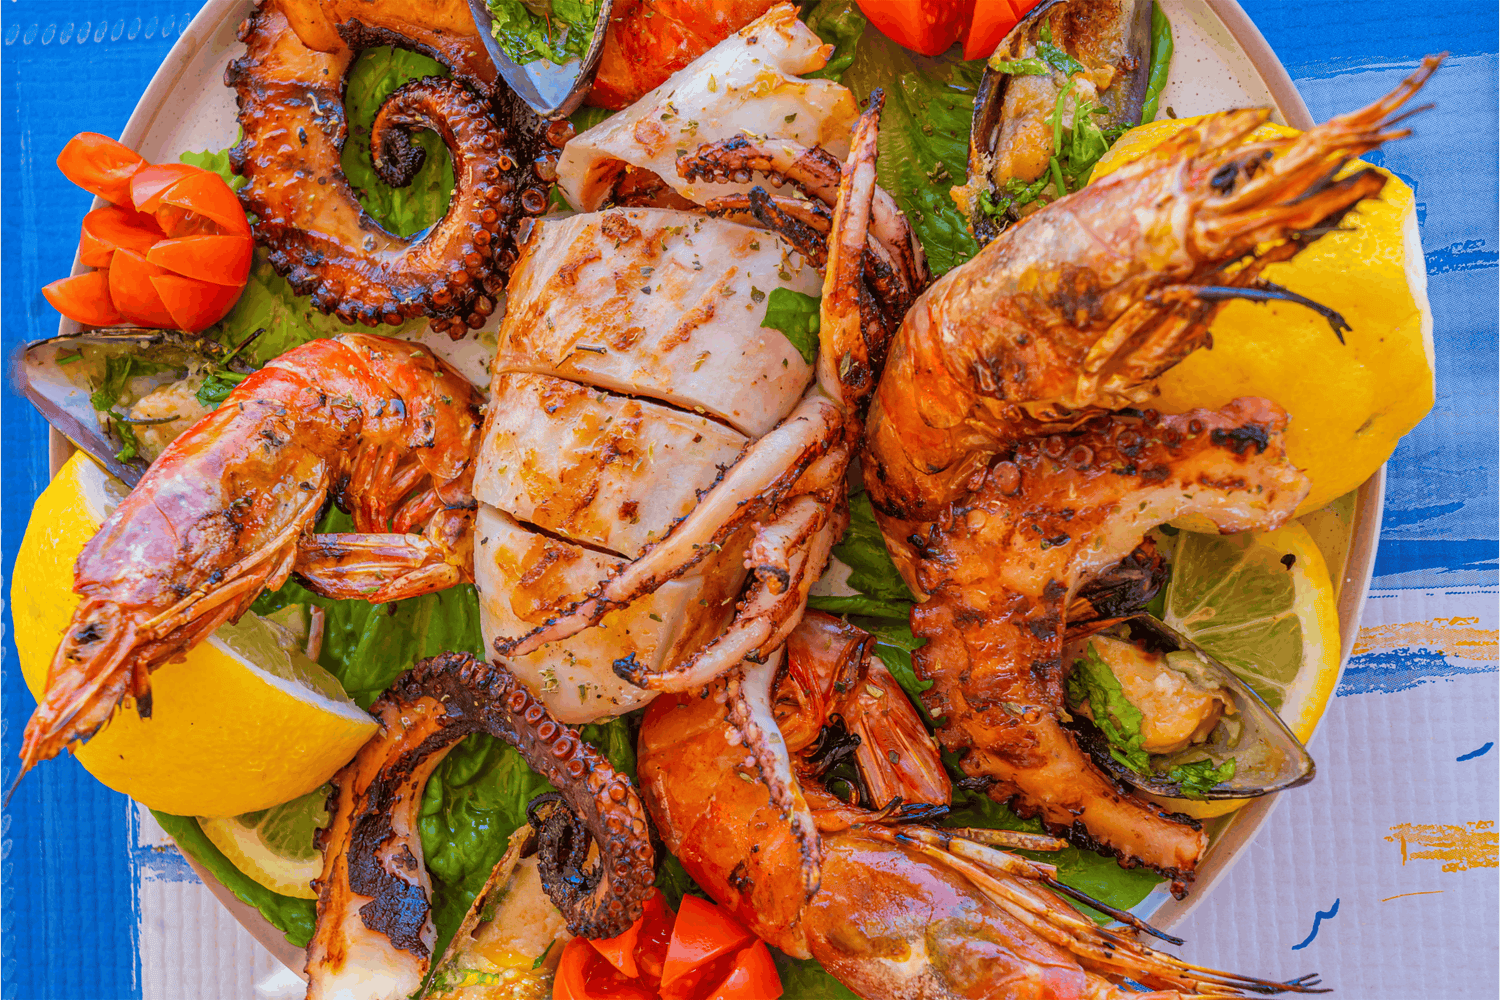 The air fryer uses hot air circulation to cook your seafood to perfection, leaving it crispy on the outside and juicy on the inside.